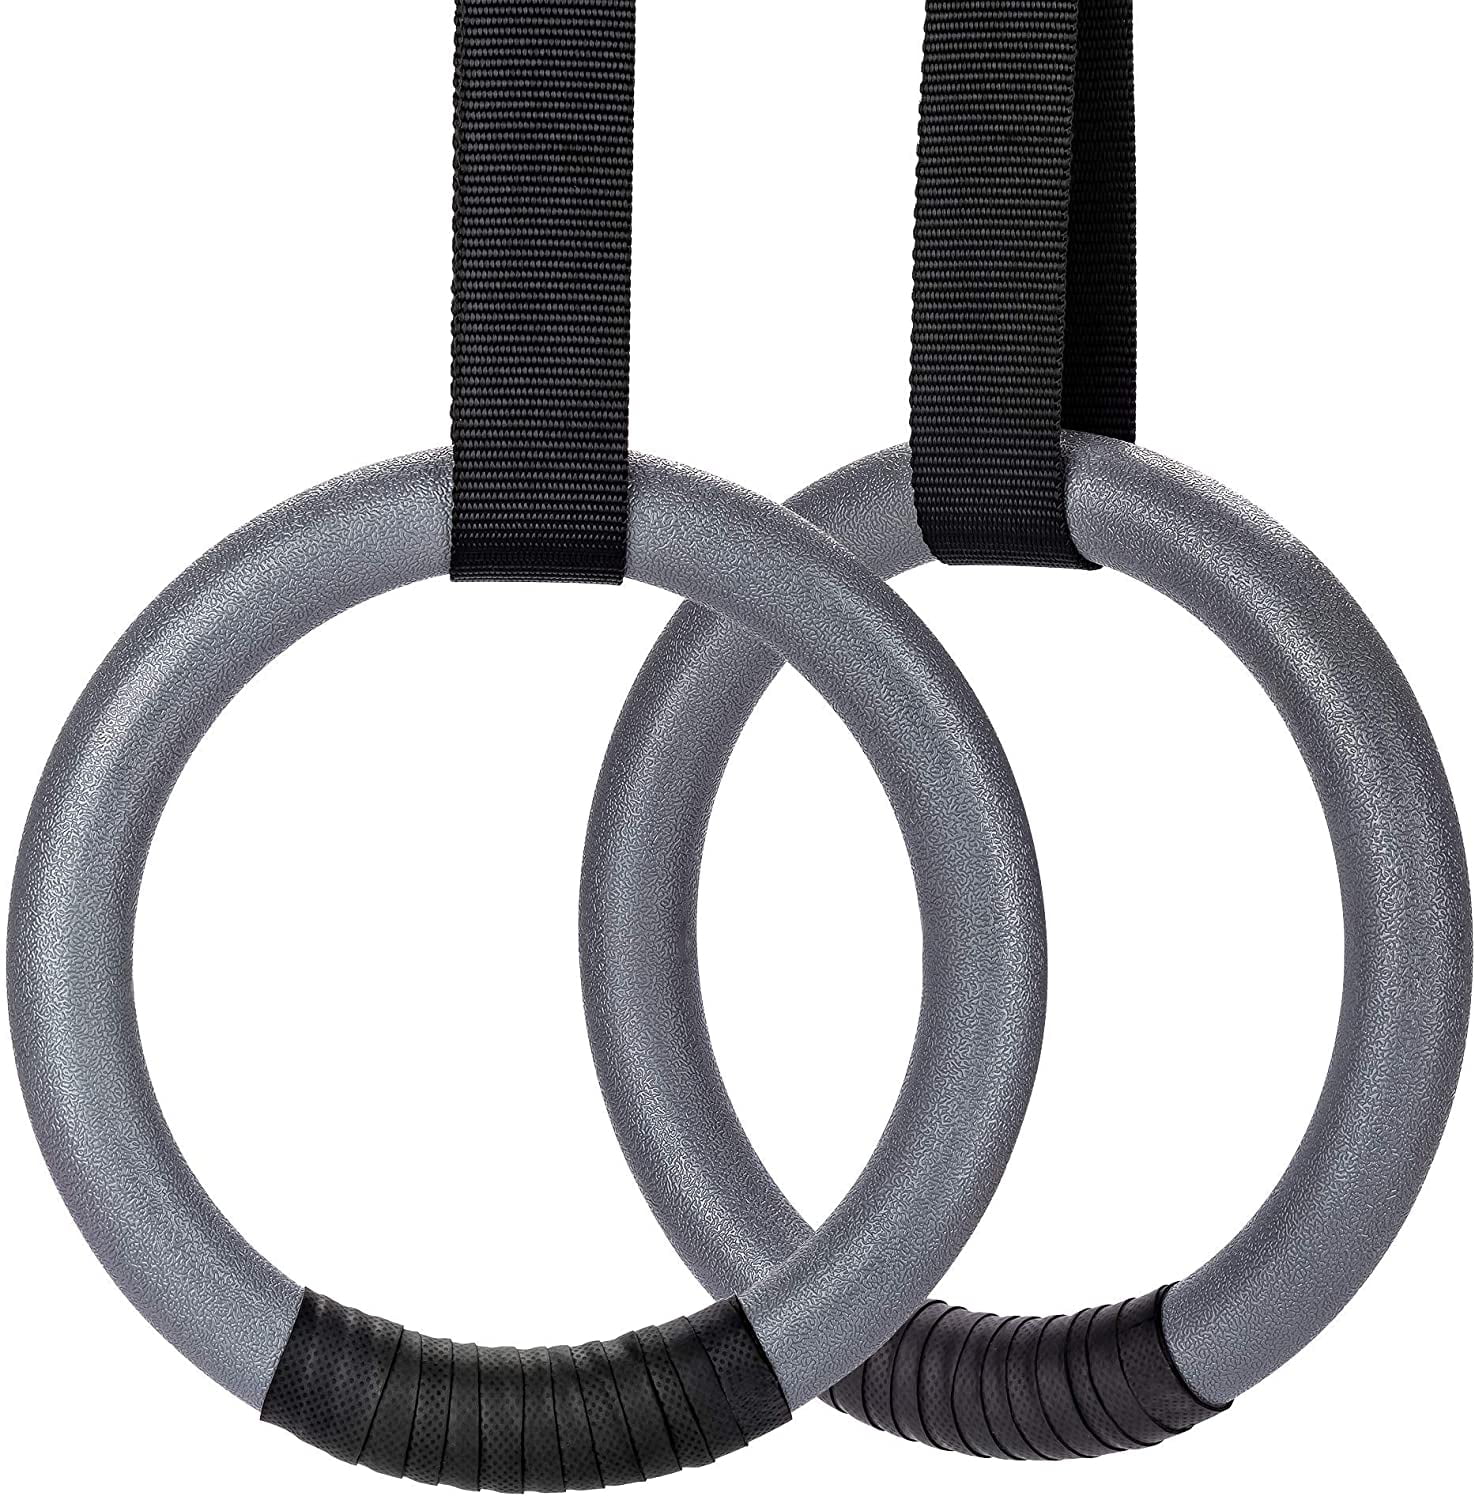 Gymnastic Rings 1100lbs Capacity With 14.76ft Adjustable Buckle Straps Pull Up & 